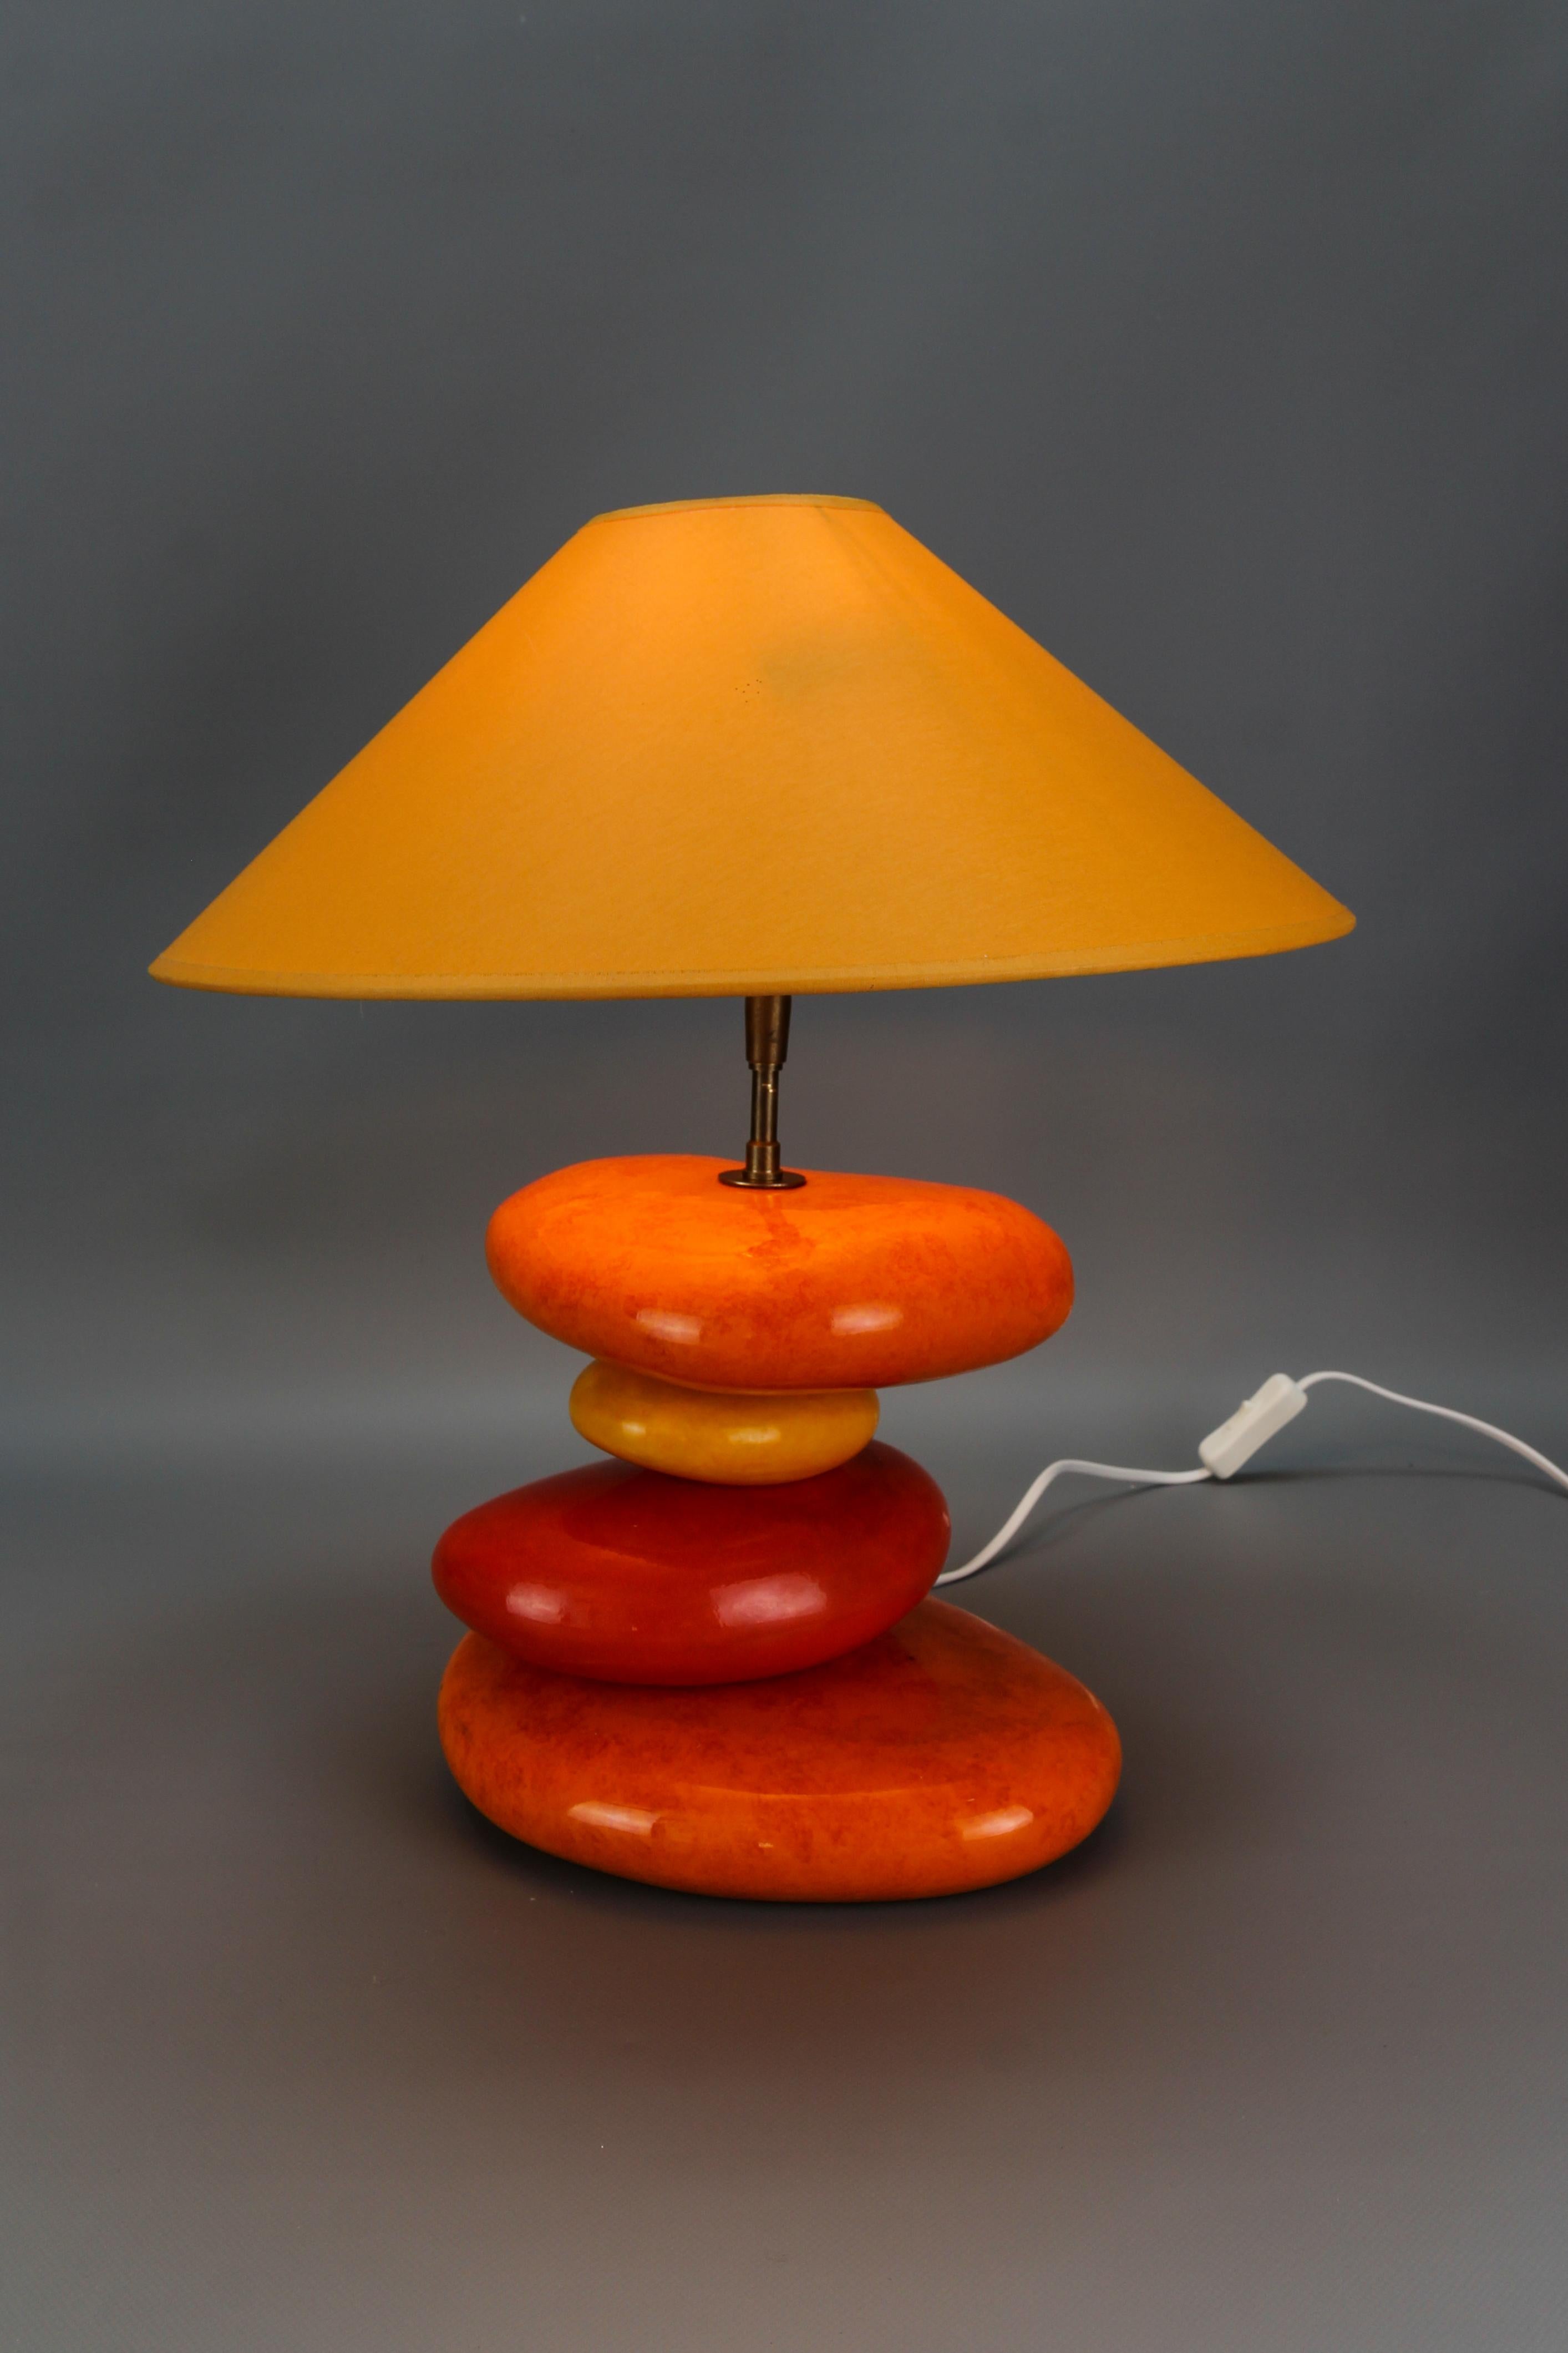 French yellow and orange glazed ceramic table lamp by François Châtain from the late 20th Century.
This colorful table lamp features an impressive lamp base - pebble-shaped irregularly stacked spheres made of ceramic and glazed in dark and light